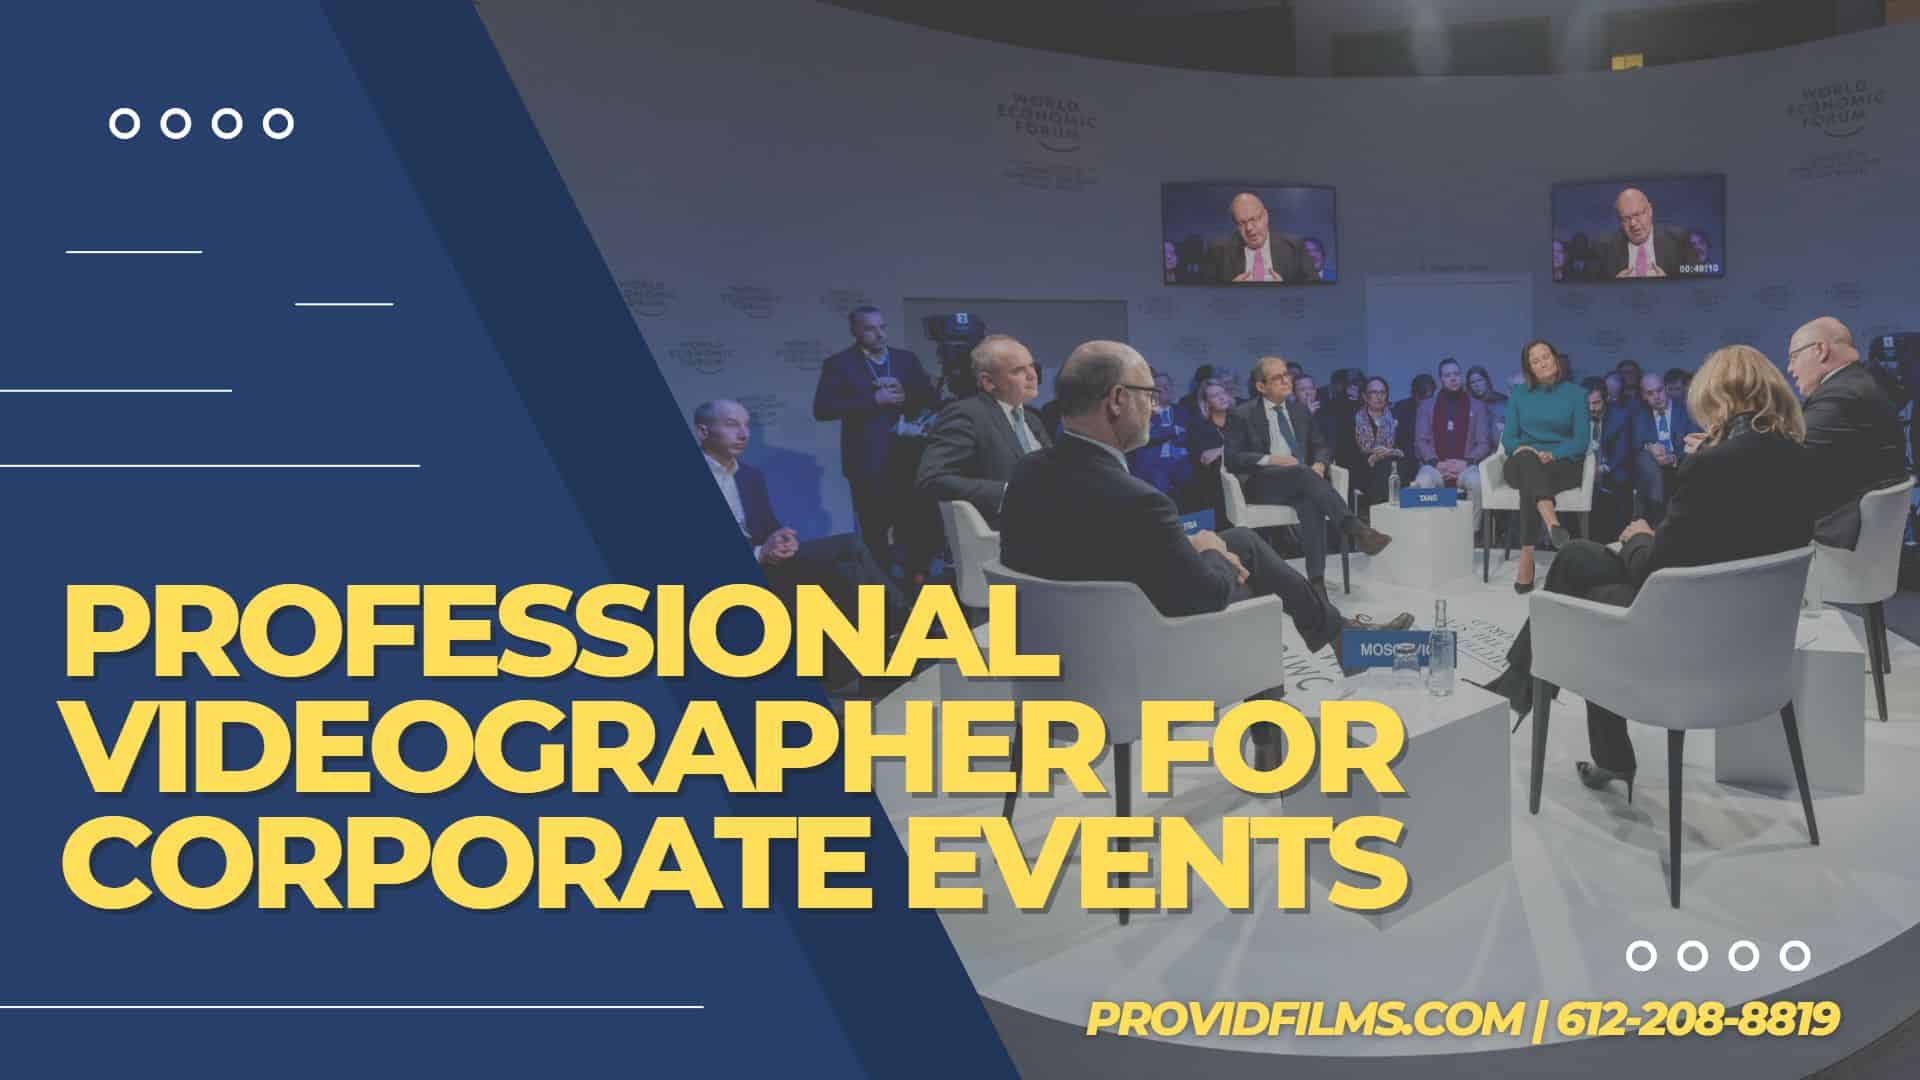 Graphic of people at a forum with the text saying "Professional Videographer for Corporate Events"